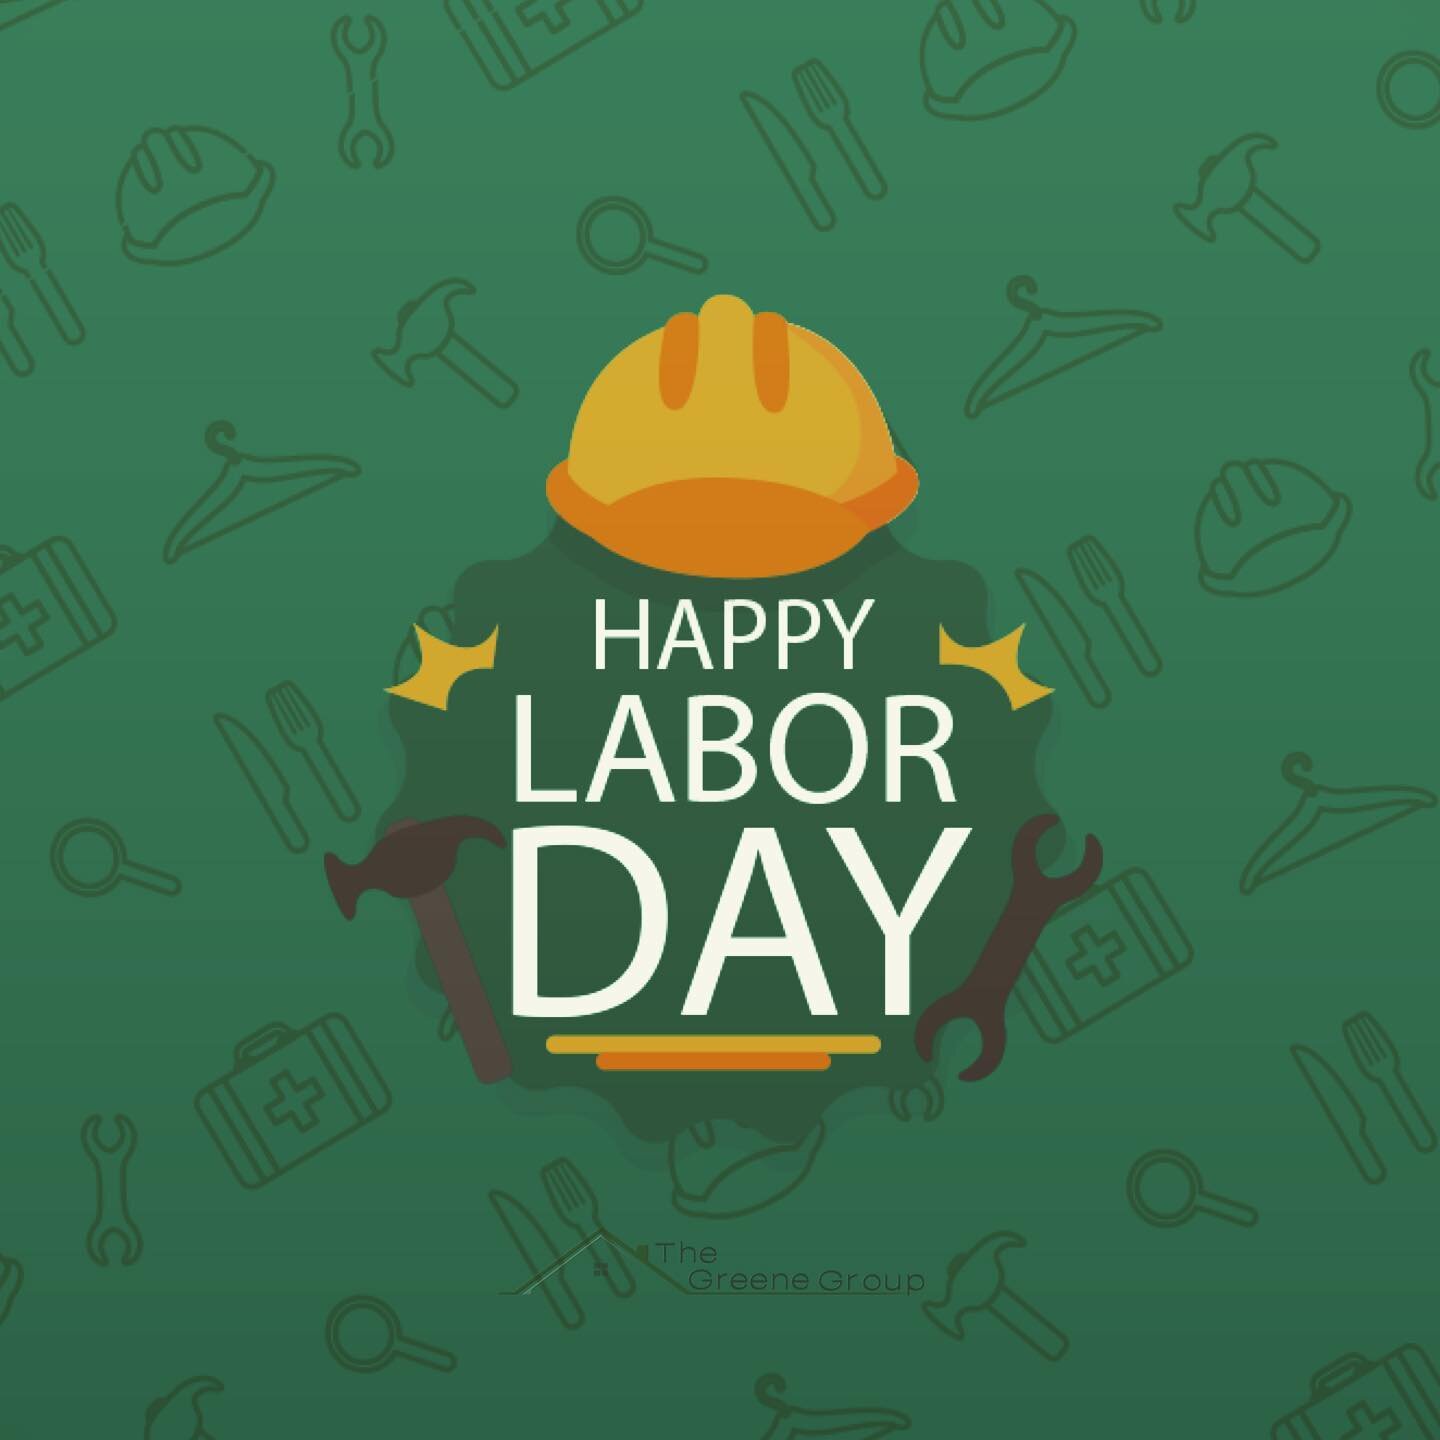 There is no substitute for hard work. 

Happy Labor Day 🧰